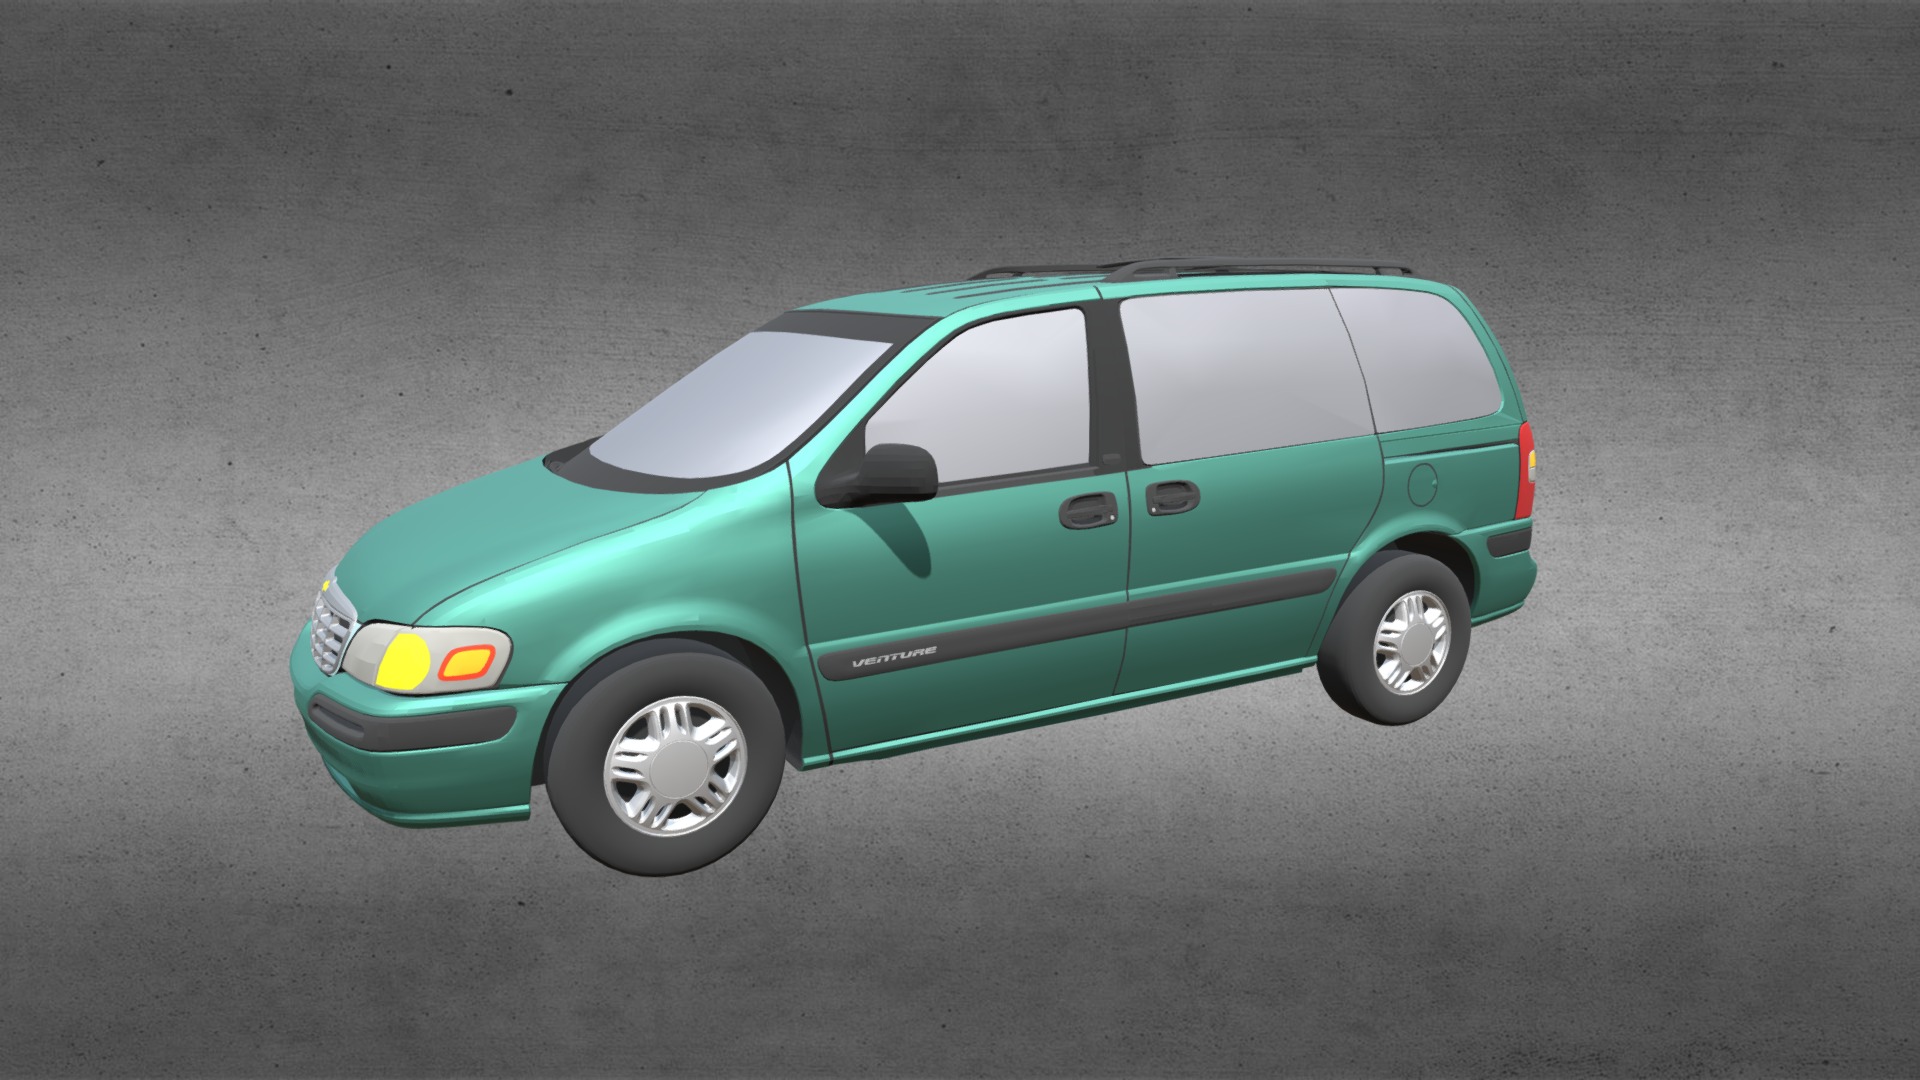 3D model Chevy Venture 1998 - This is a 3D model of the Chevy Venture 1998. The 3D model is about a small green car.